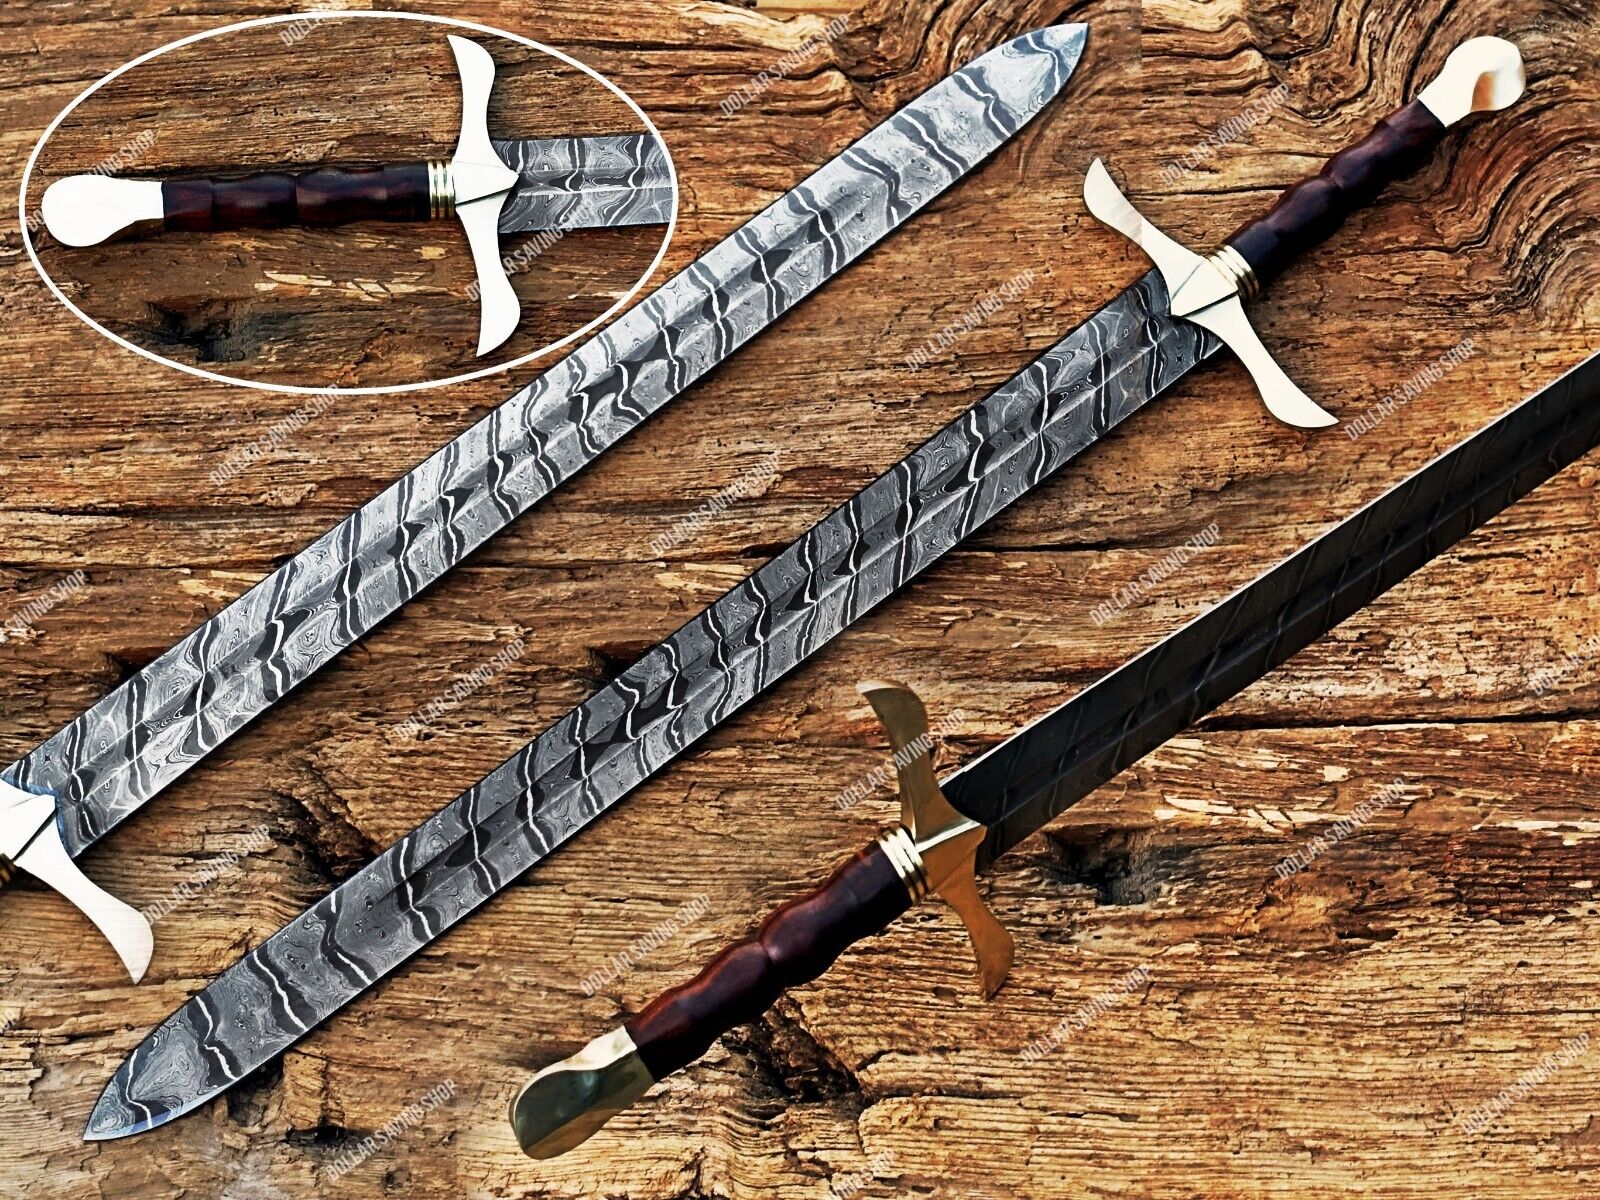 Beautiful Hand Forged Damascus Steel Assassin's Creed Sword, Medieval Sword.